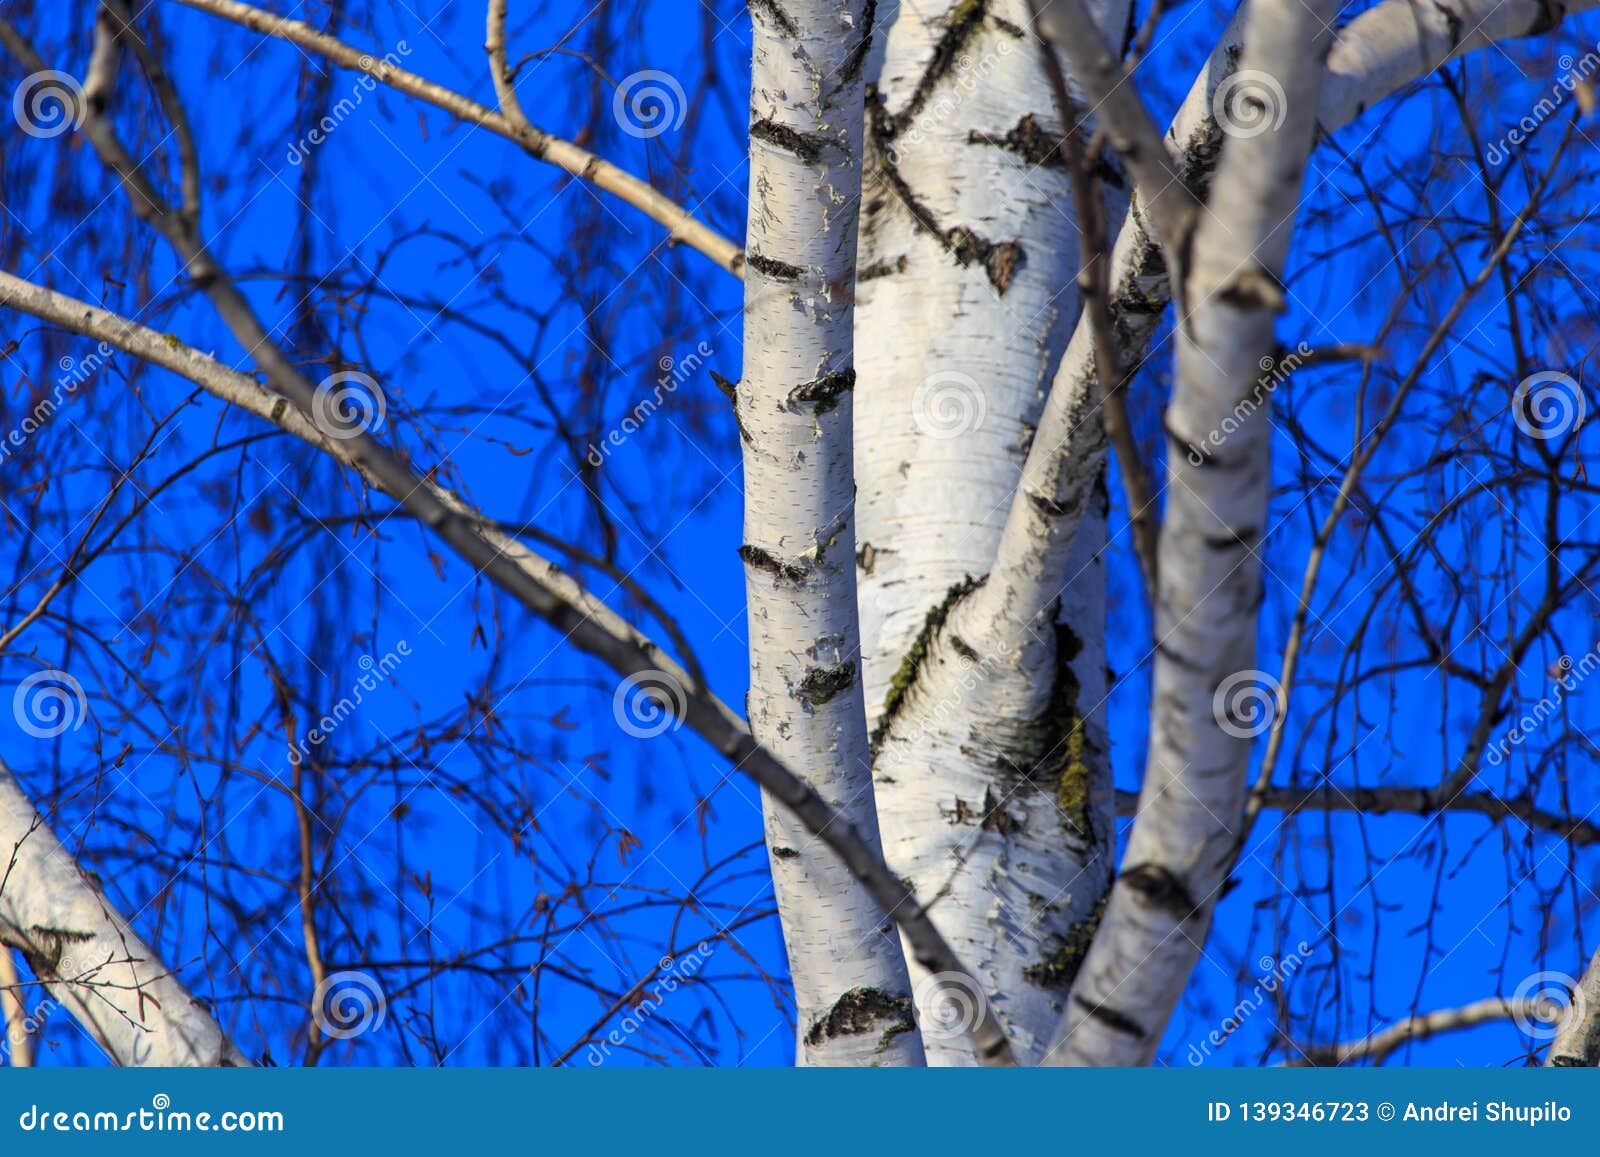 Naked Birch Trees In Heavy Mist In Countryside Stock Image 